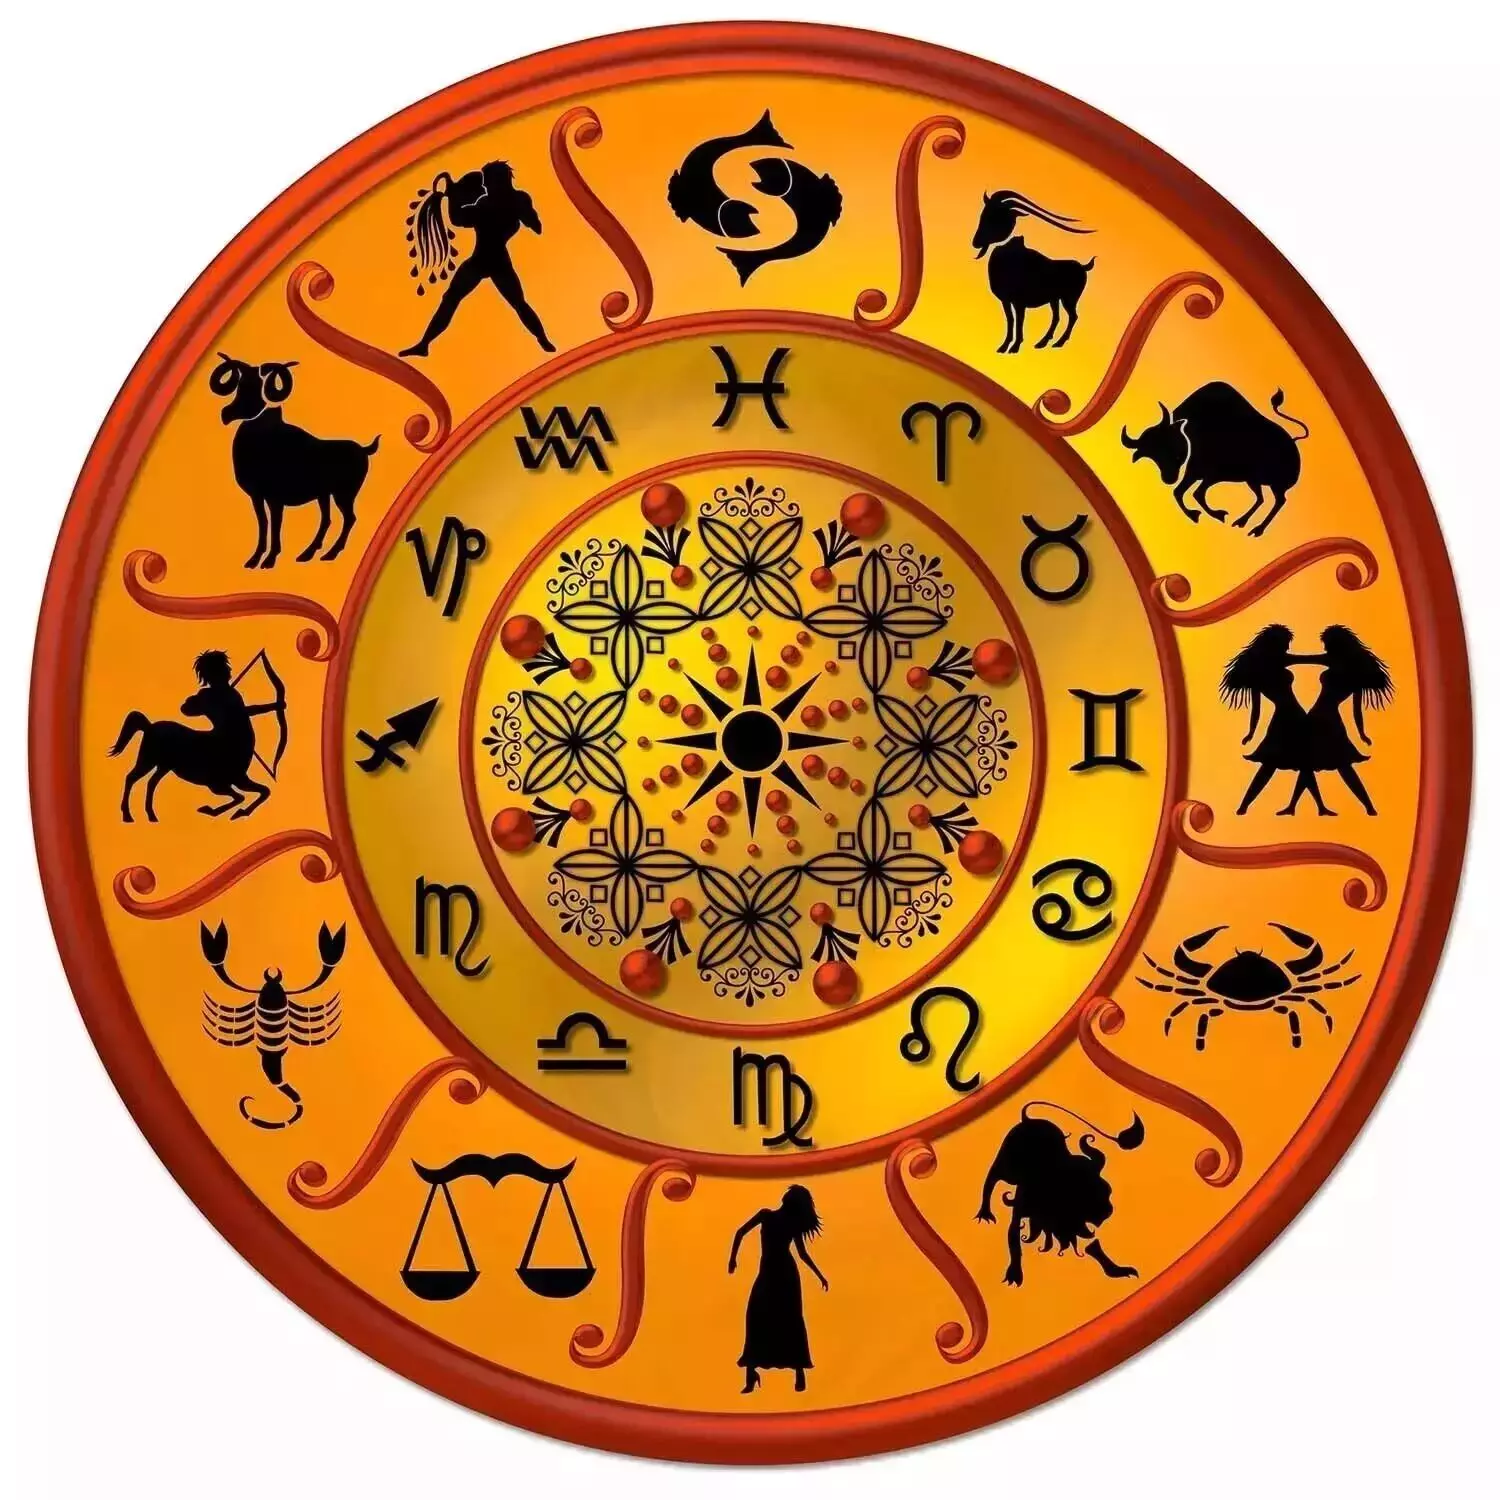 27 January – Know your todays horoscope